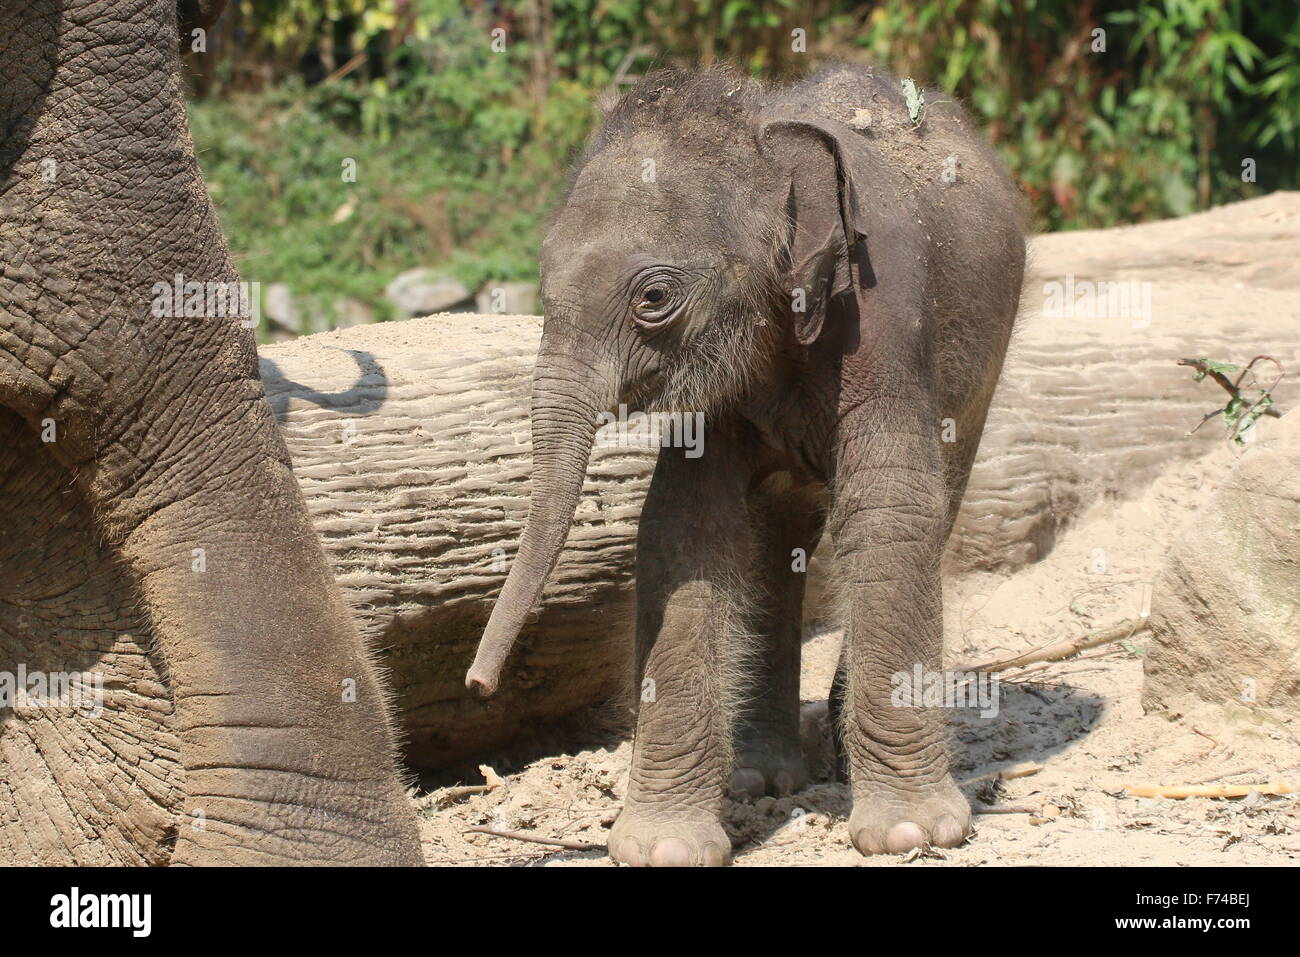 Baby Asian elephant (Elephas maximus Indicus) standing next to his mother's leg. Stock Photo